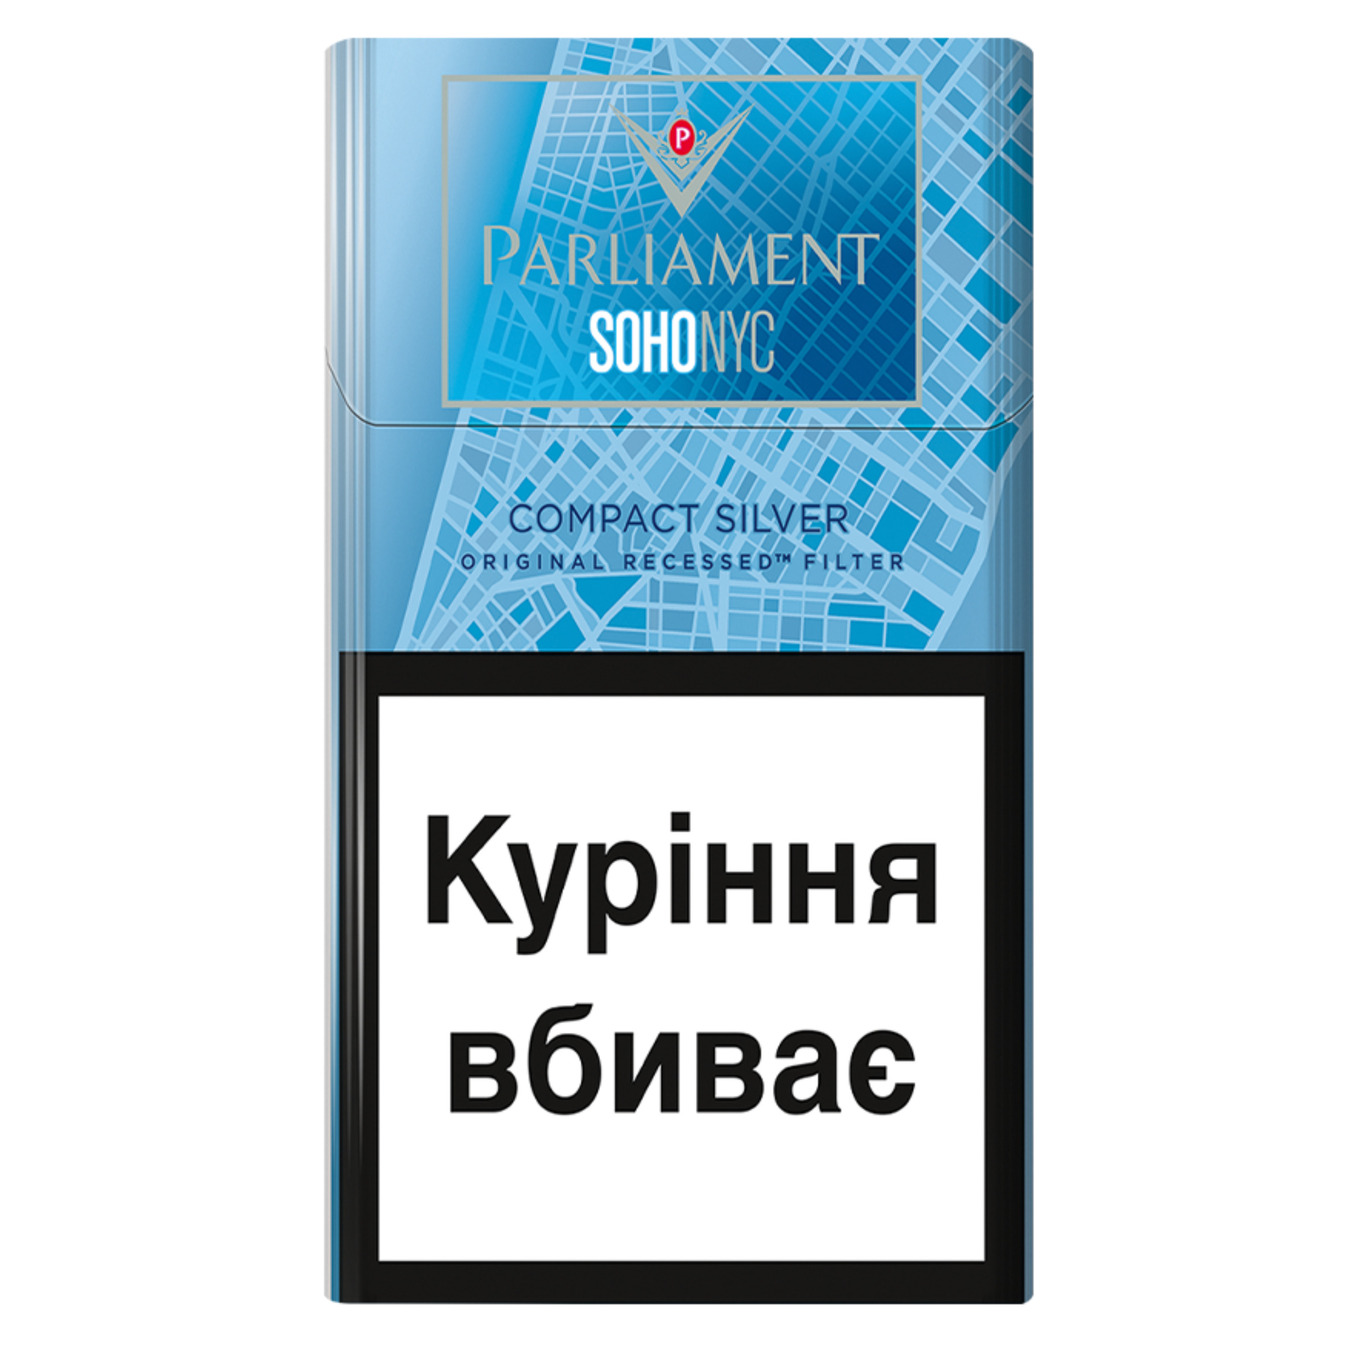 Cigarettes Parliament Soho NYC Compact Silver 20pcs (the price is without excise tax)